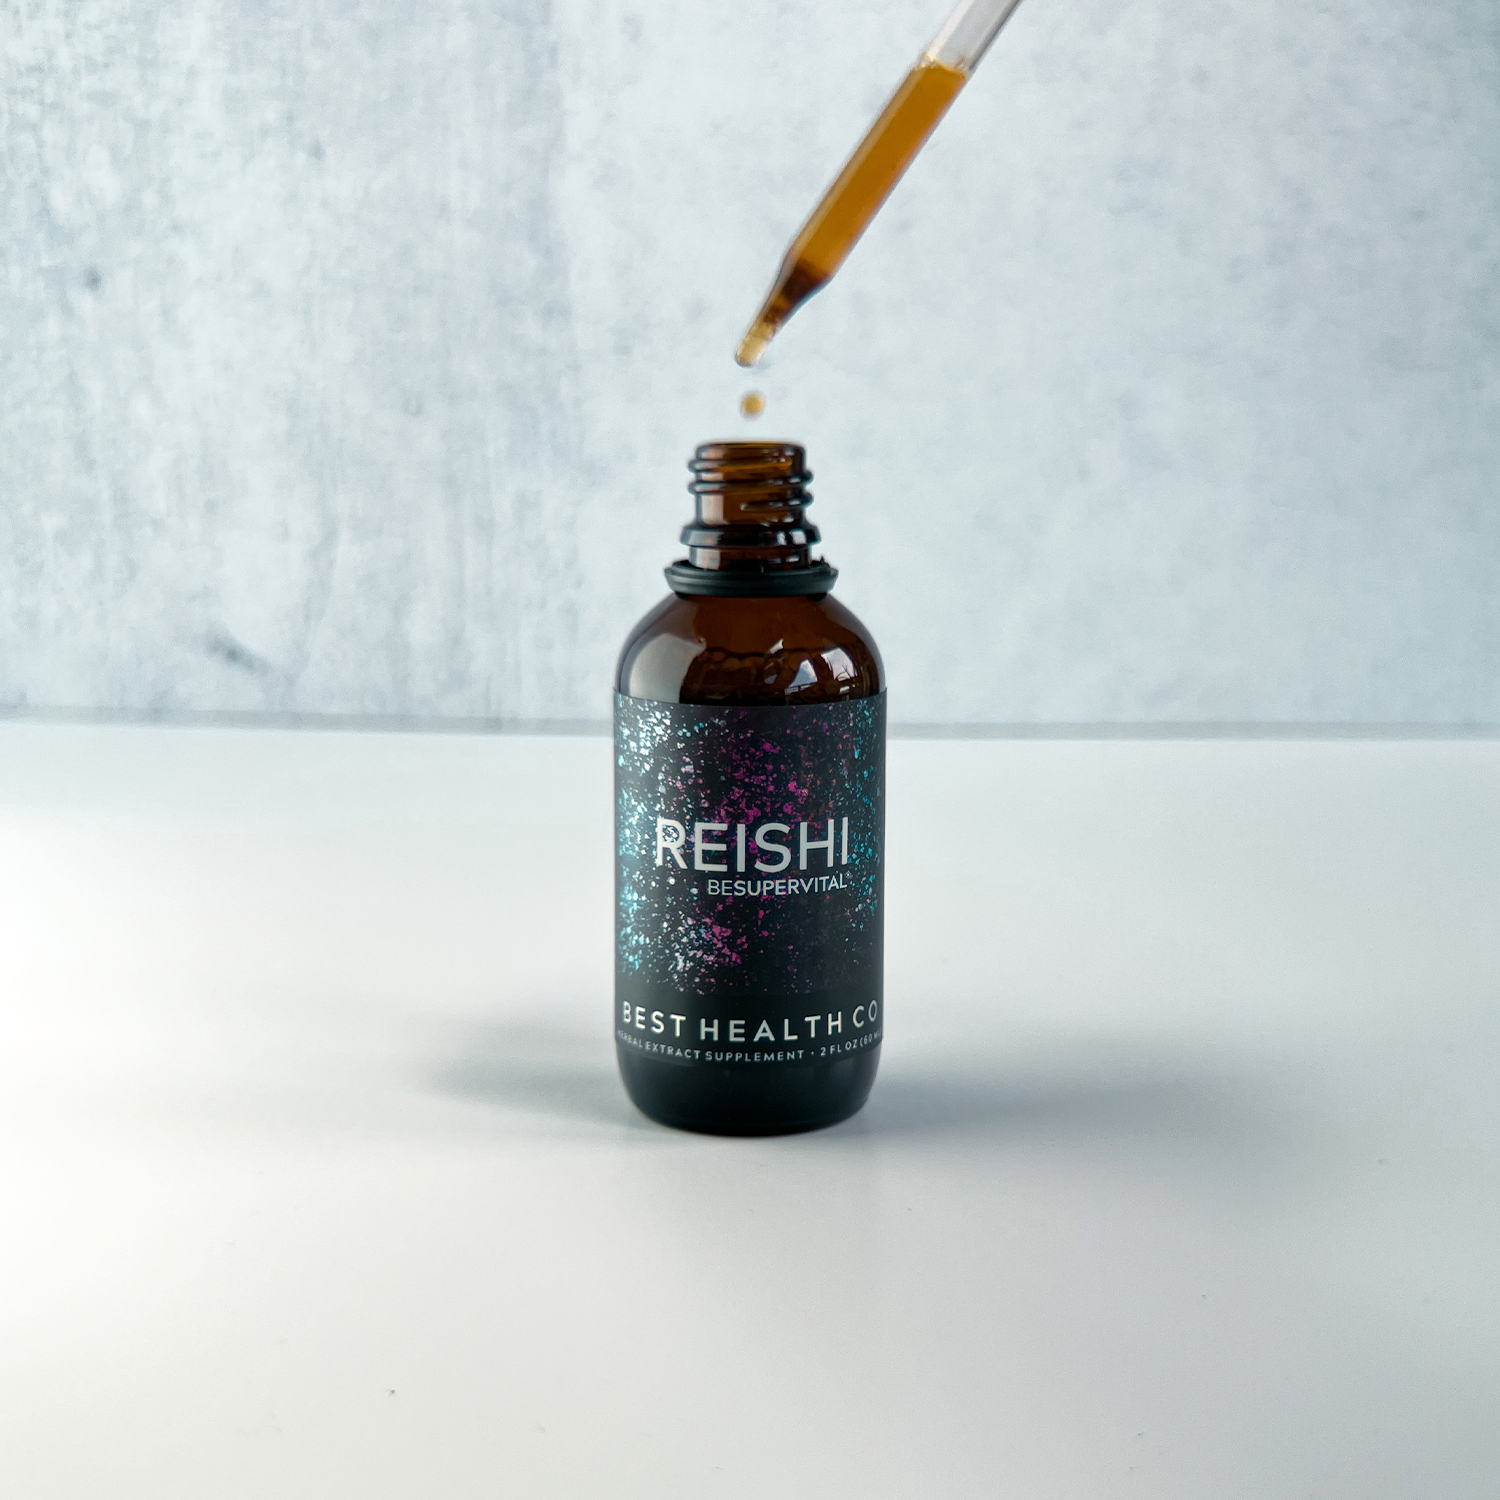 REISHI mushroom extract with dropper from Best Health Co.